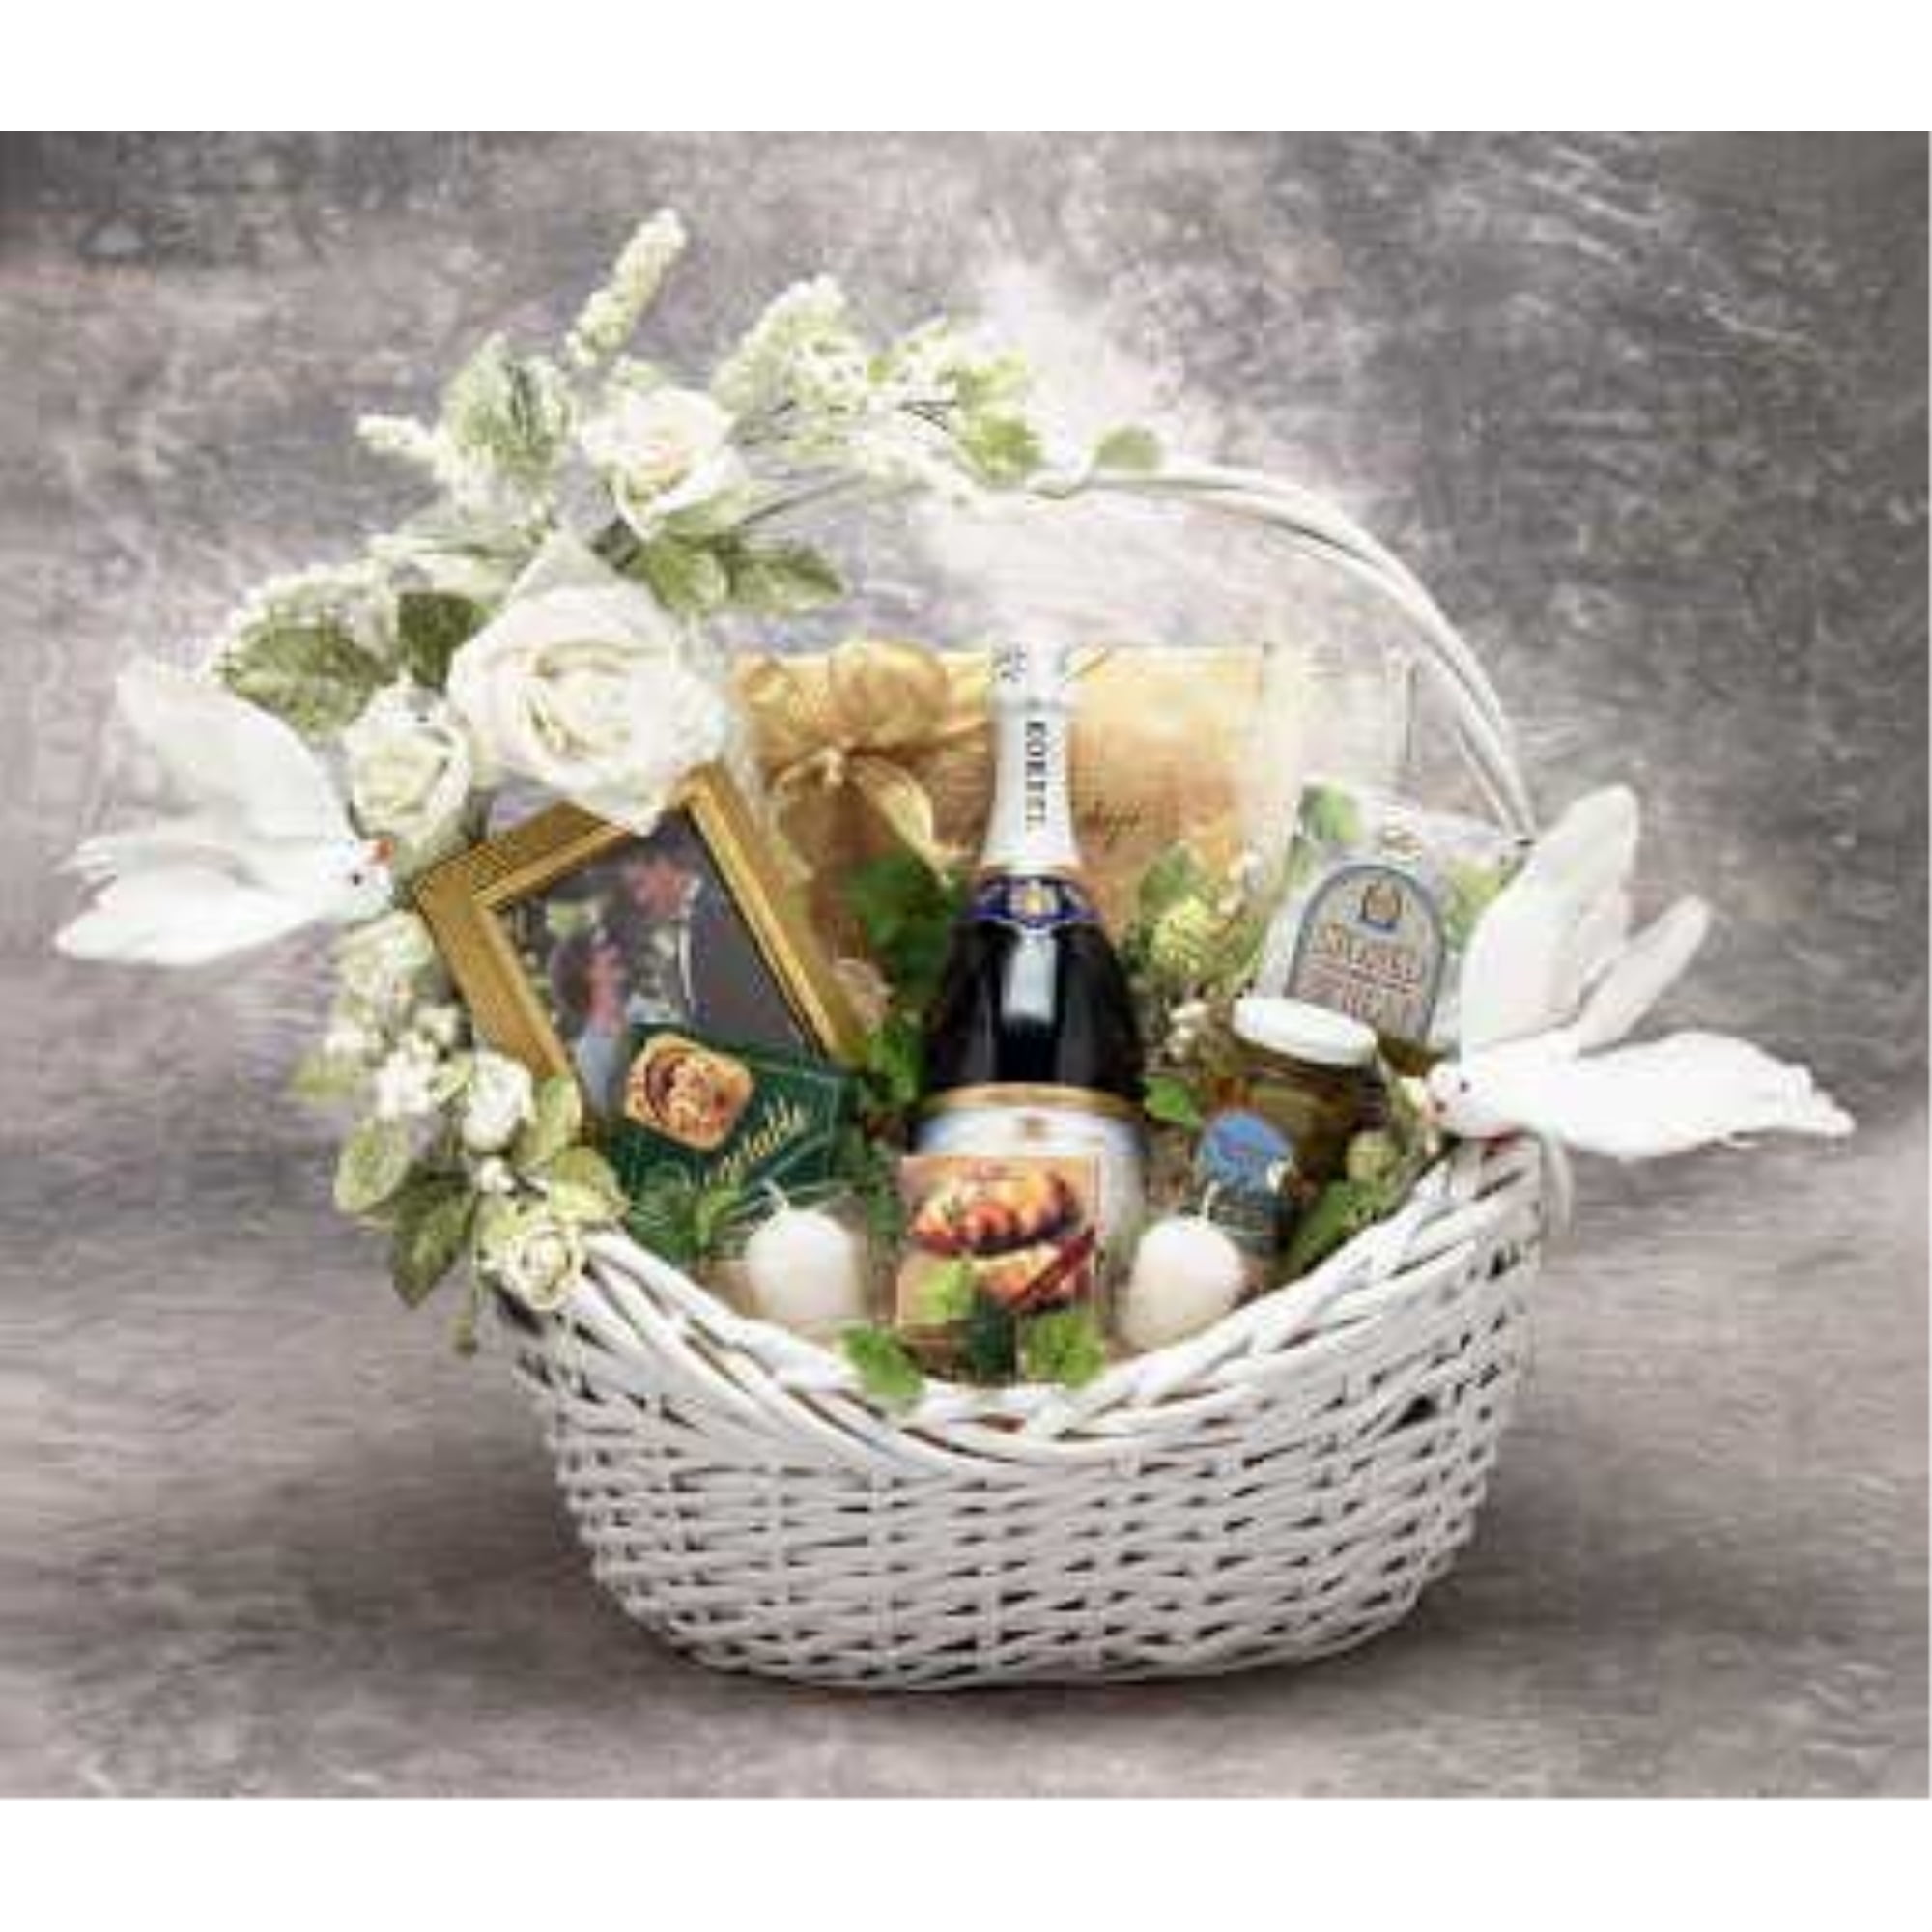 Swgglo Gifts for Grandma - Birthday Gifts for Grandma - Grandma Gifts - Christmas Gifts for Grandma - Best Mother's Day Birthday Grandma Gift Basket